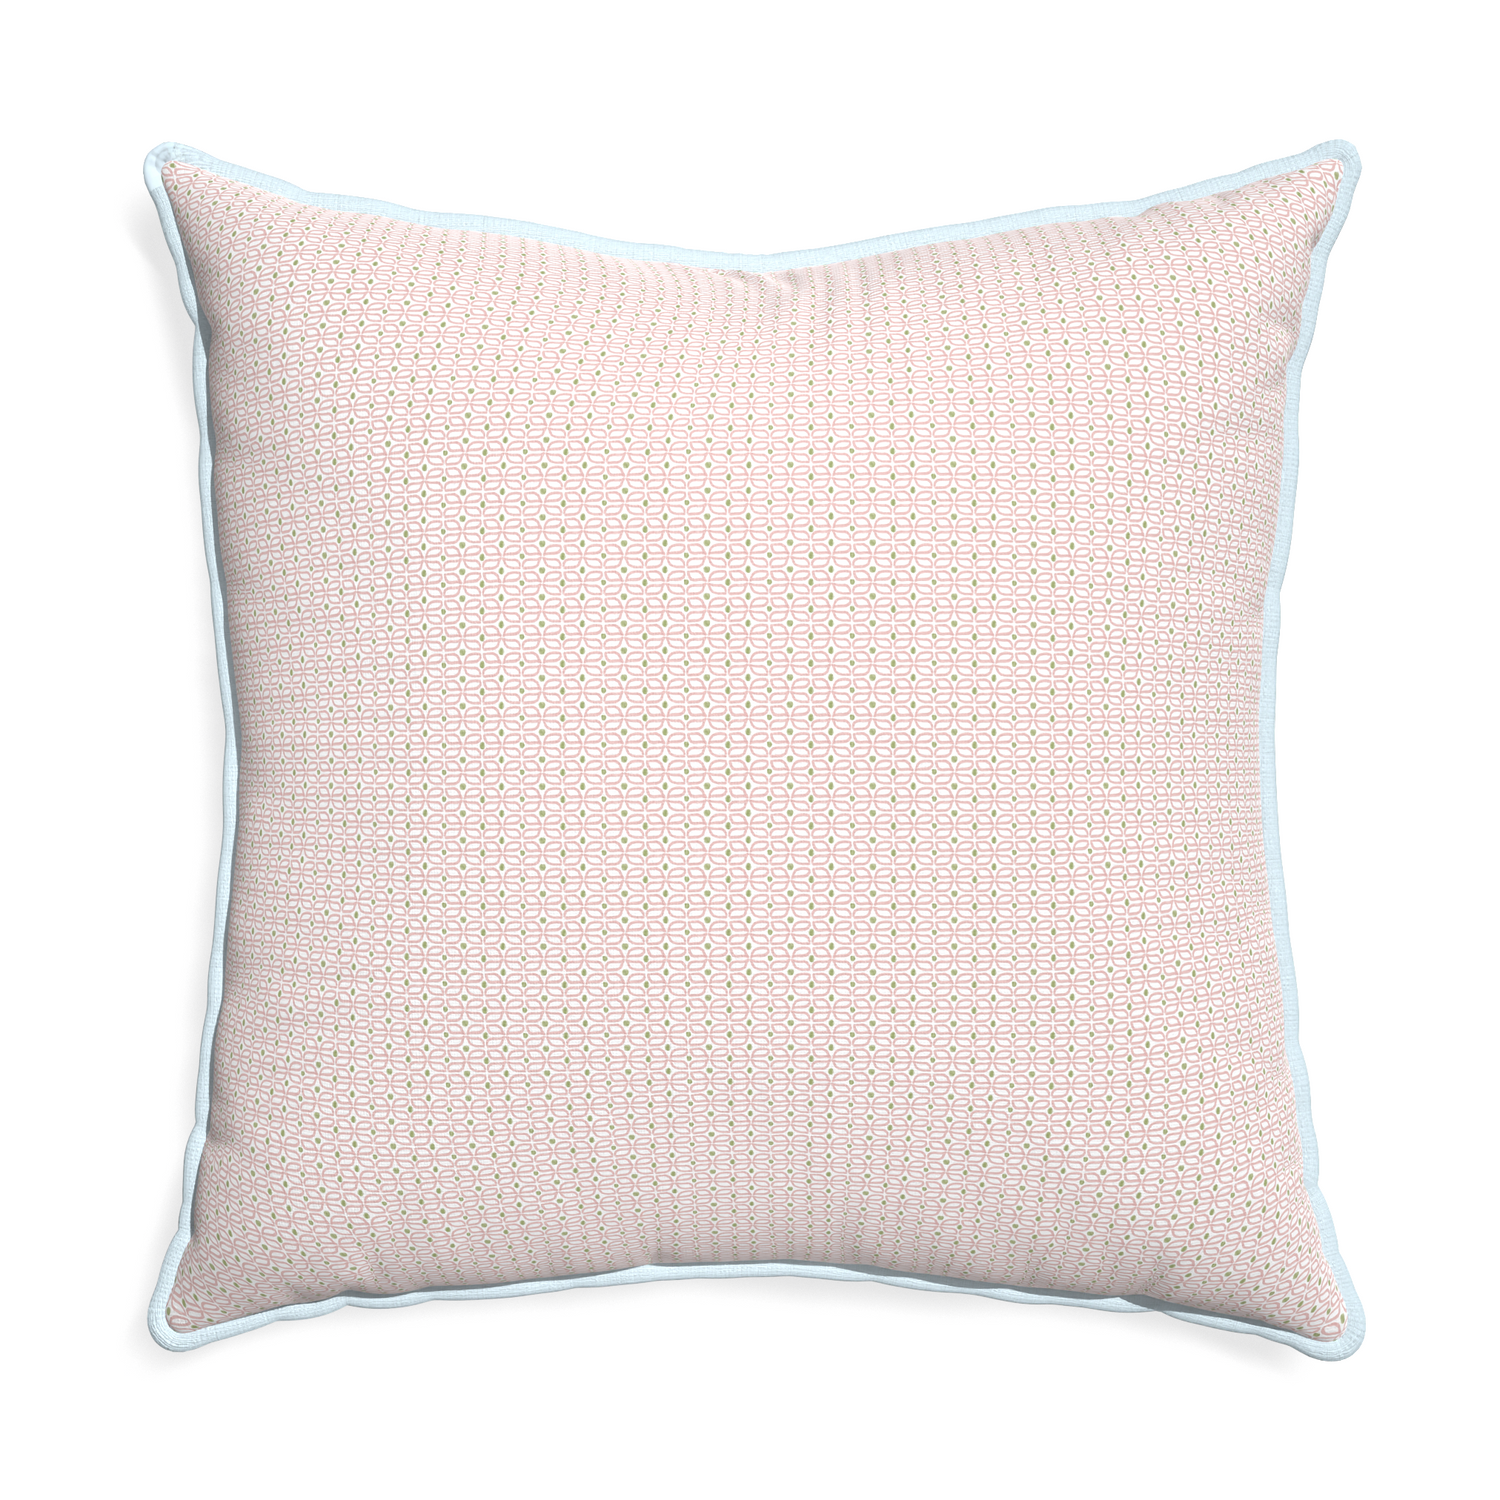 Euro-sham loomi pink custom pink geometricpillow with powder piping on white background